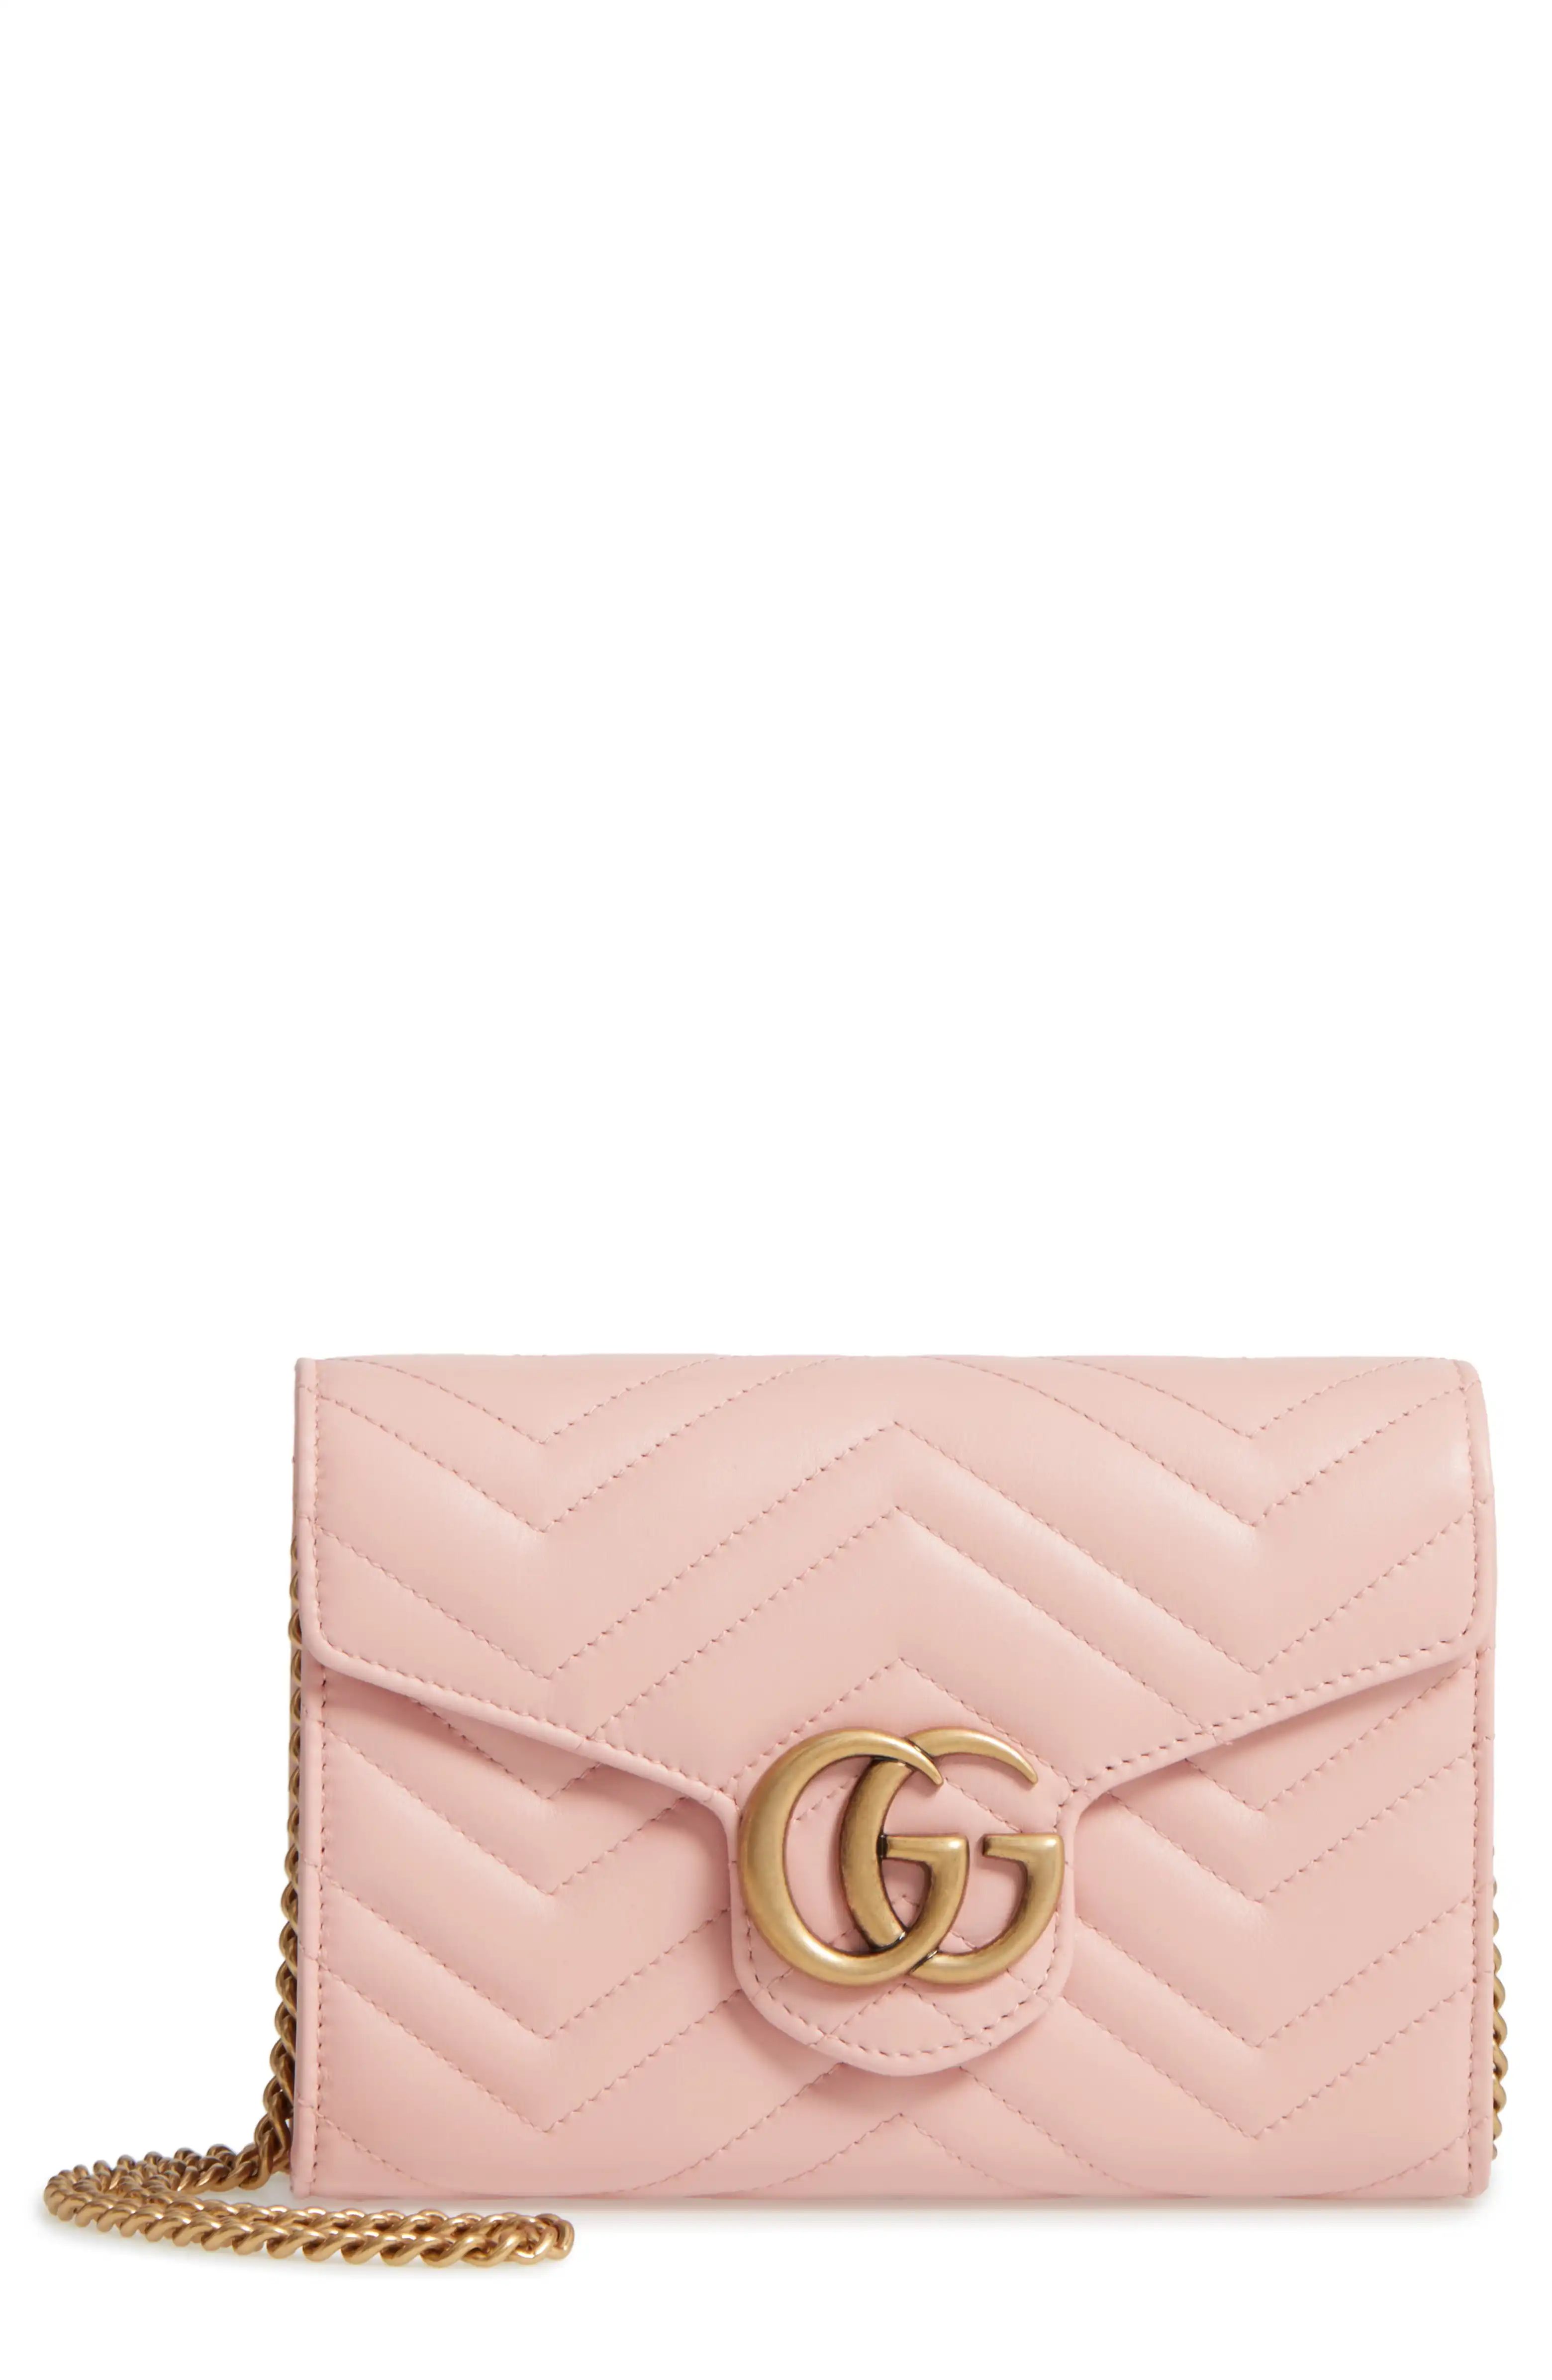 GG Marmont Matelassé Leather Wallet on a Chain | Nordstrom